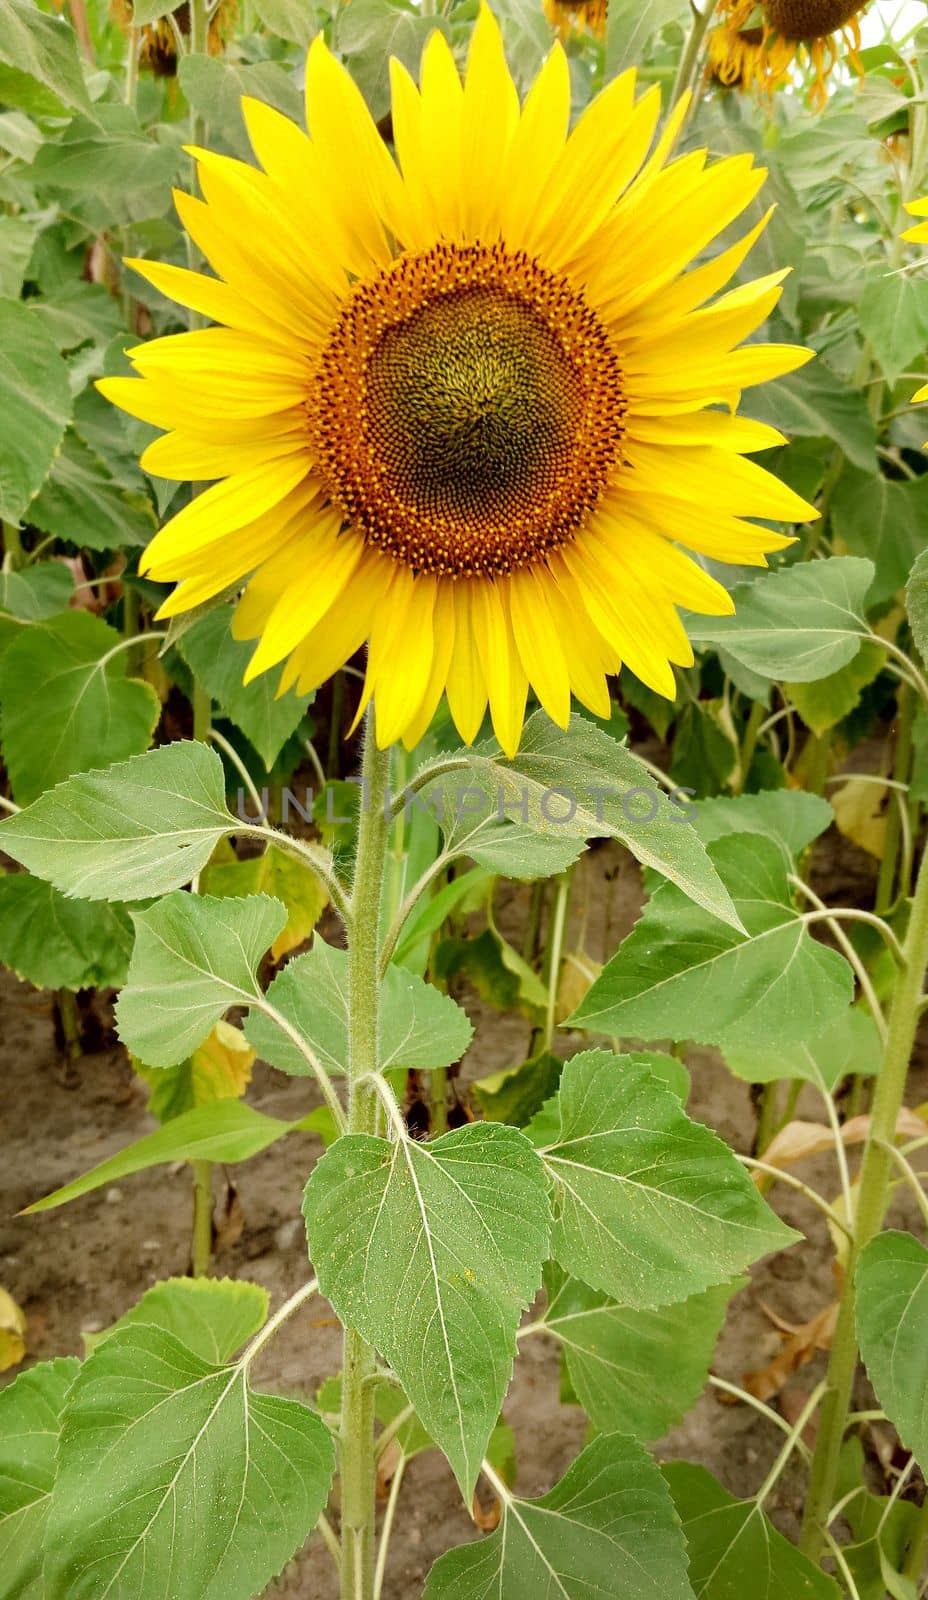 In full bloom agricultural plant yellow sunflower close-up on a cloudy day.Texture or background.